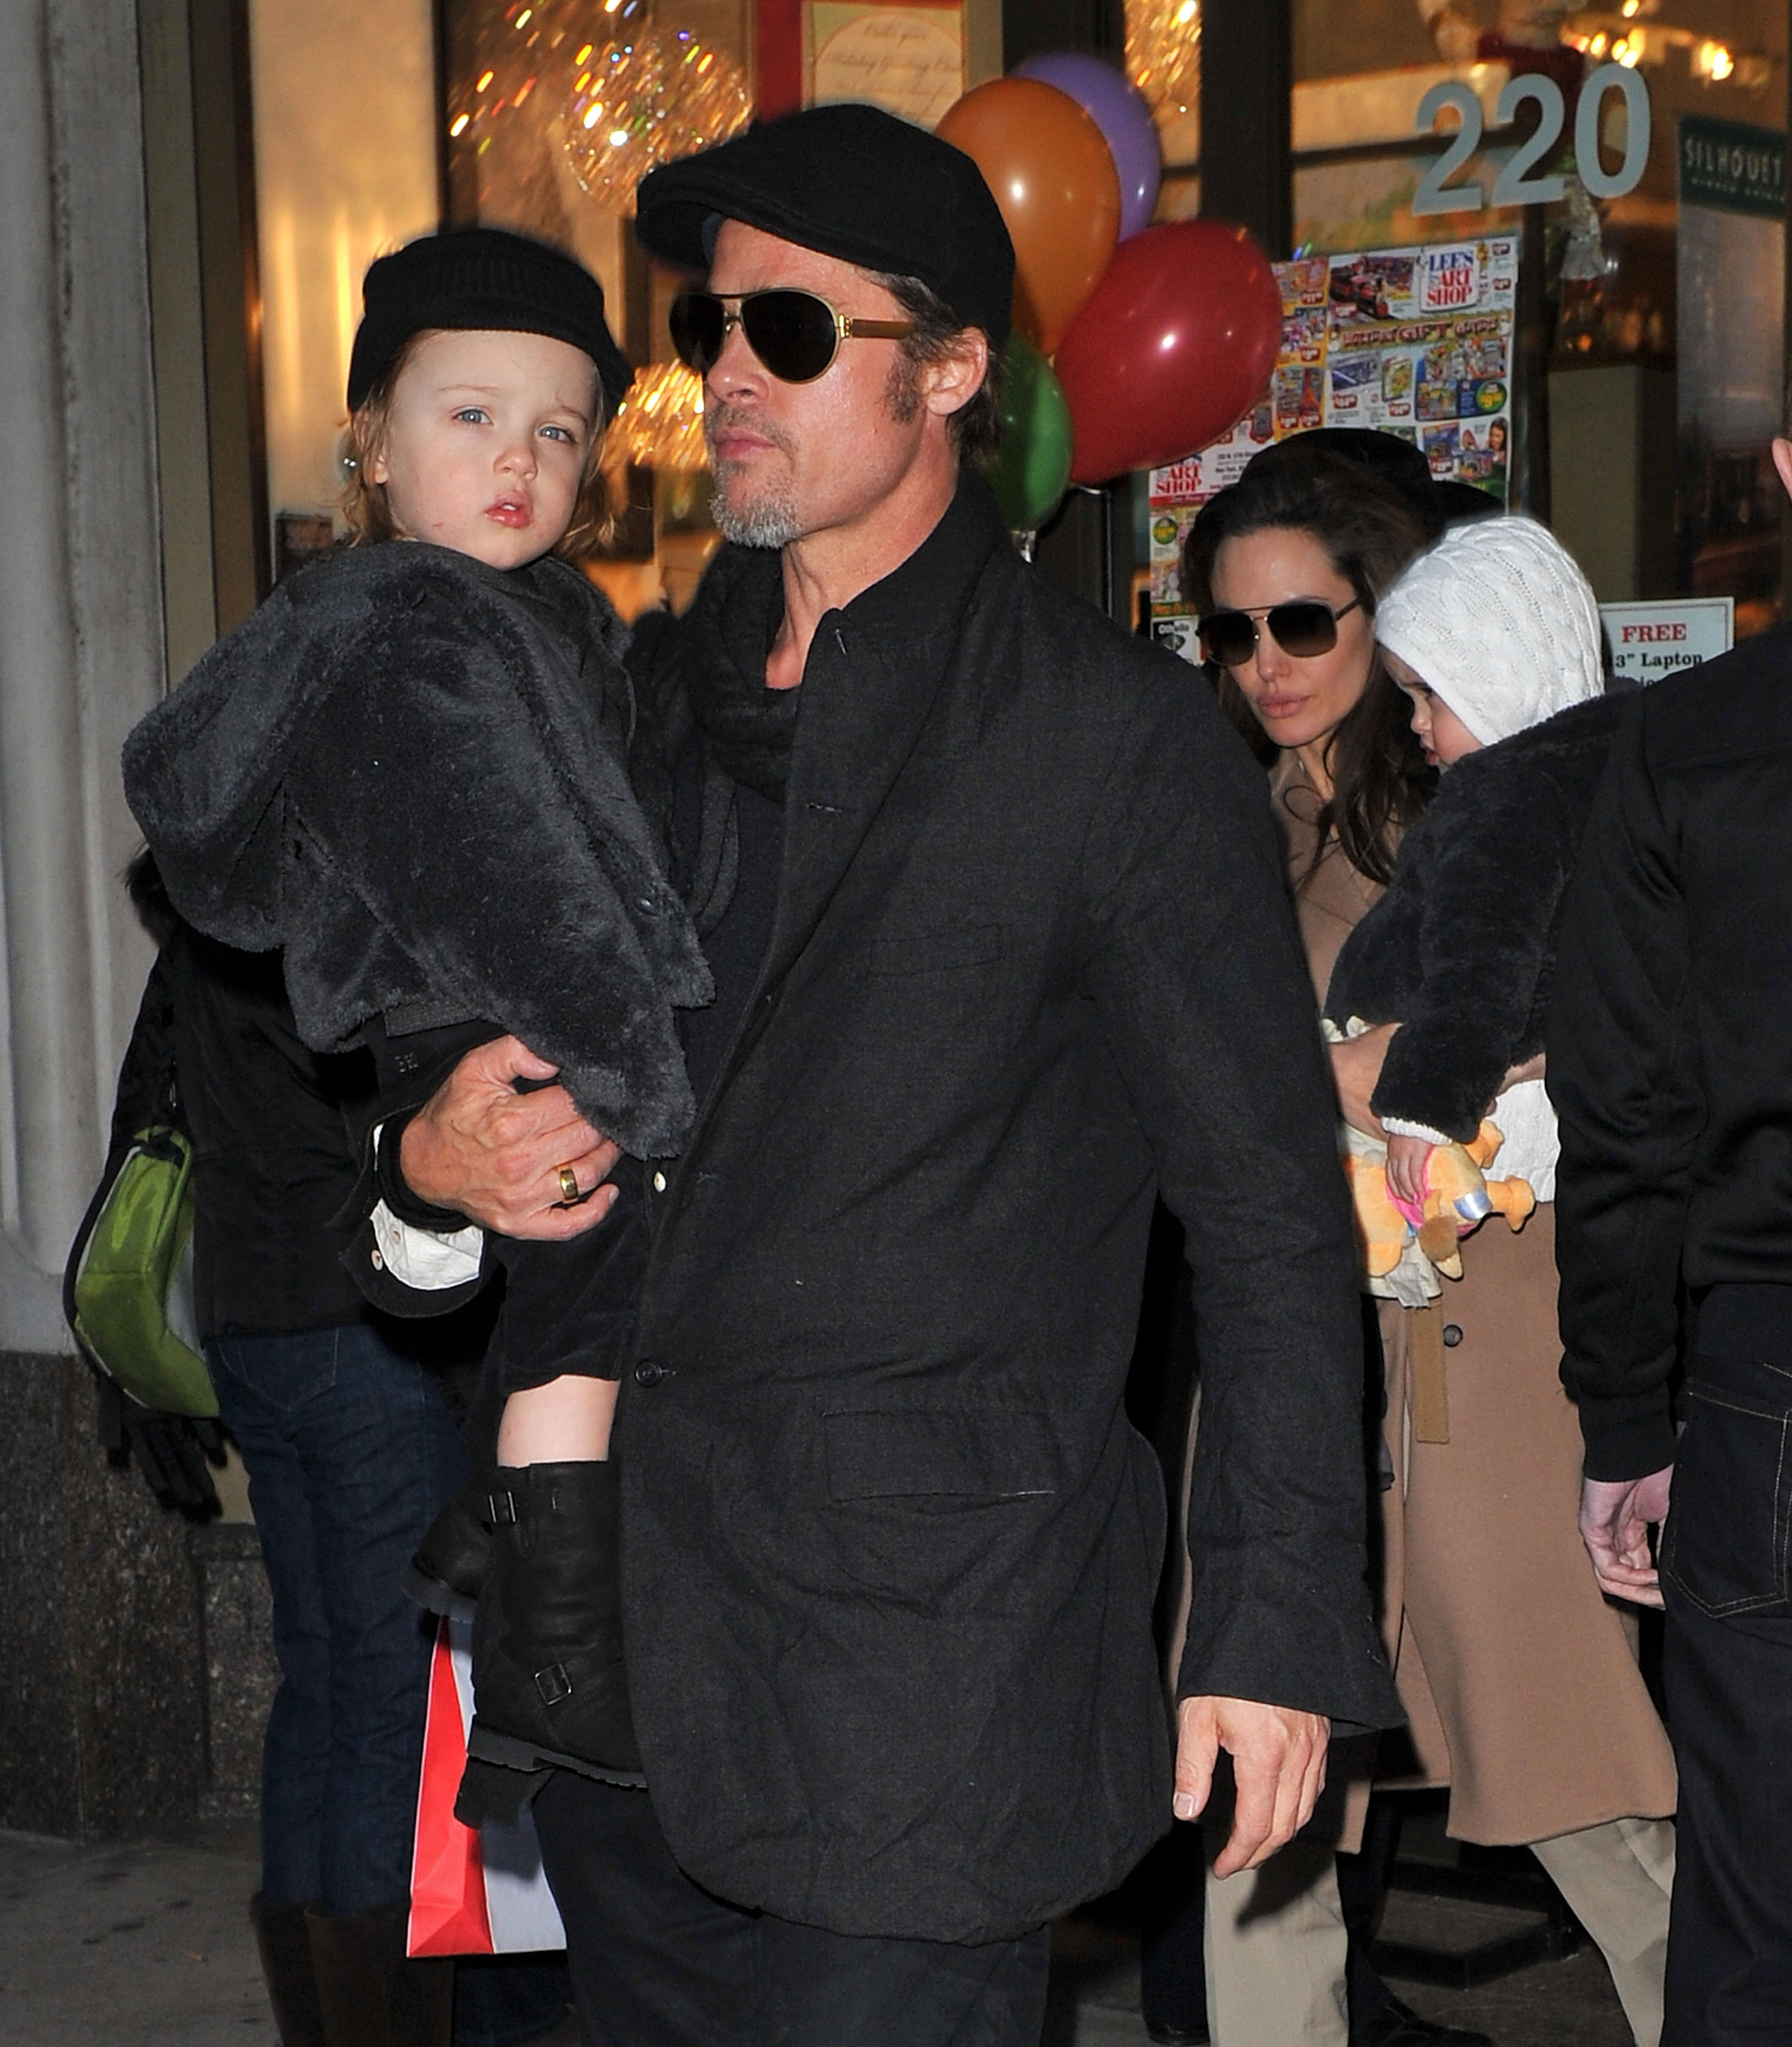 Brad Pitt and Angelina Jolie walks with their children Vivienne and Knox Jolie-Pitt on December 4, 2010, in New York City. | Source: Getty Images